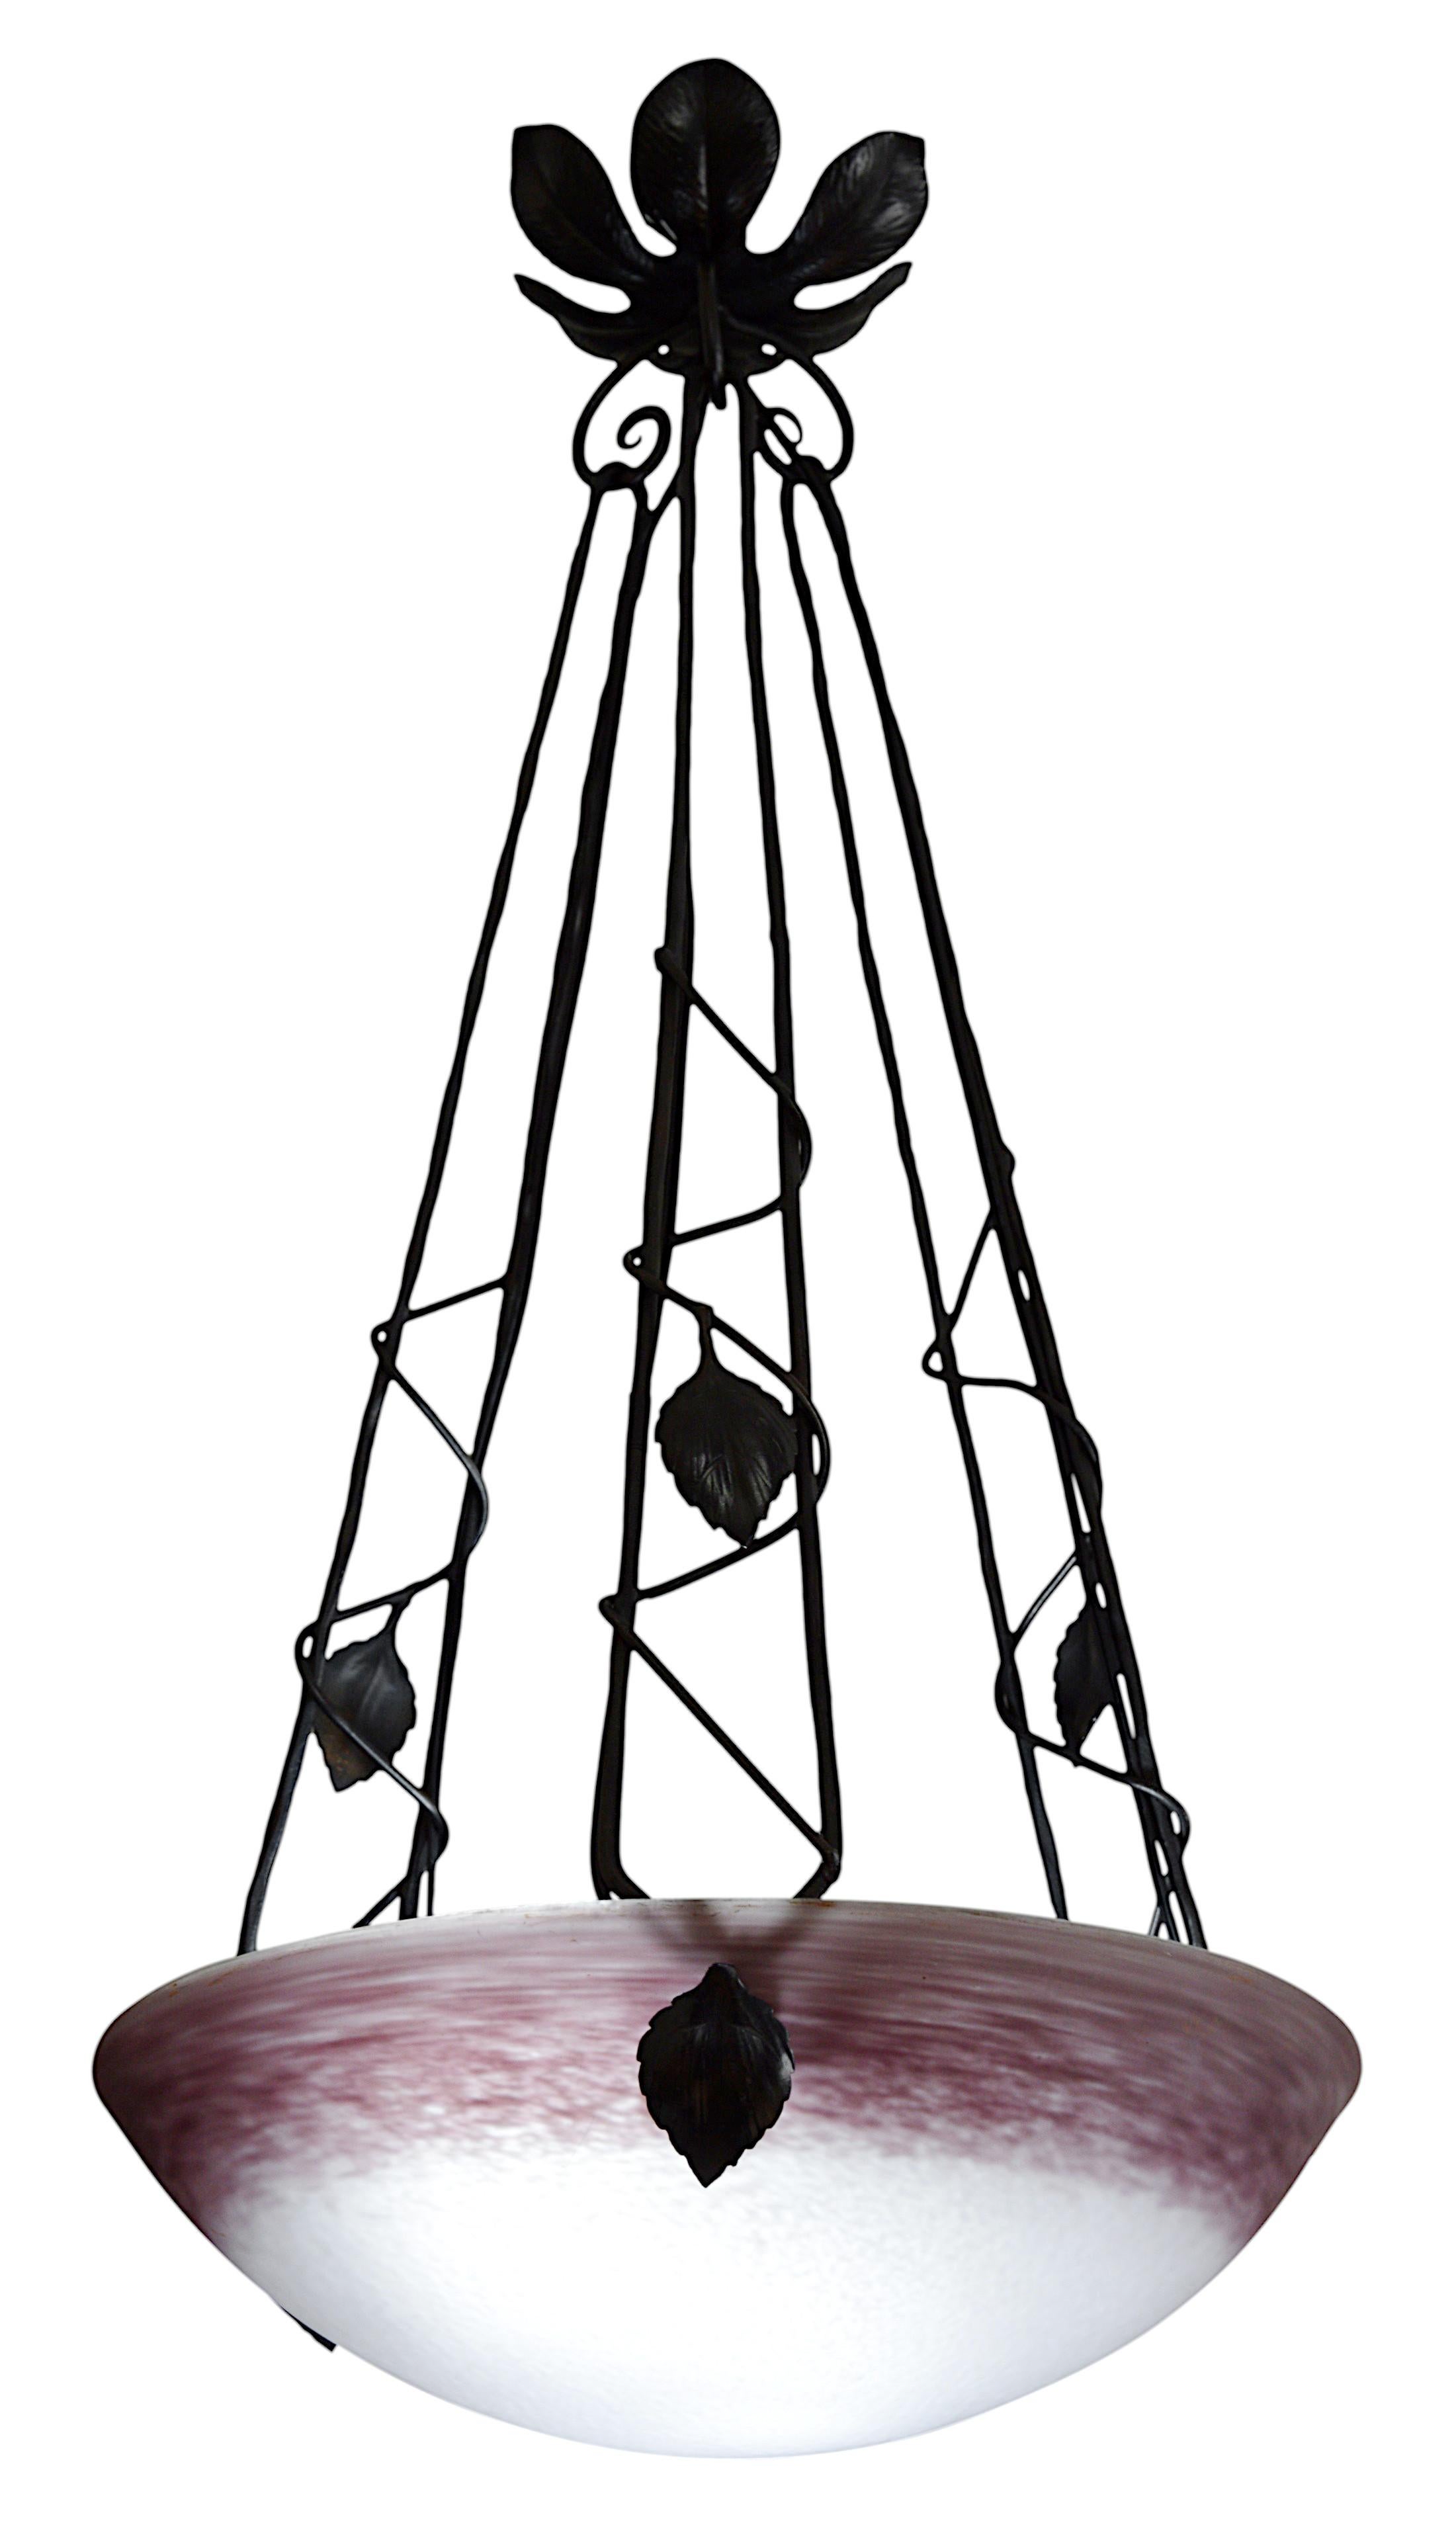 French Art Deco pendant chandelier by DEGUE (Compiegne), France, late 1920s. Mottled glass shade. Colors : purple and white. Wrought-iron fixture. Height: 25.6